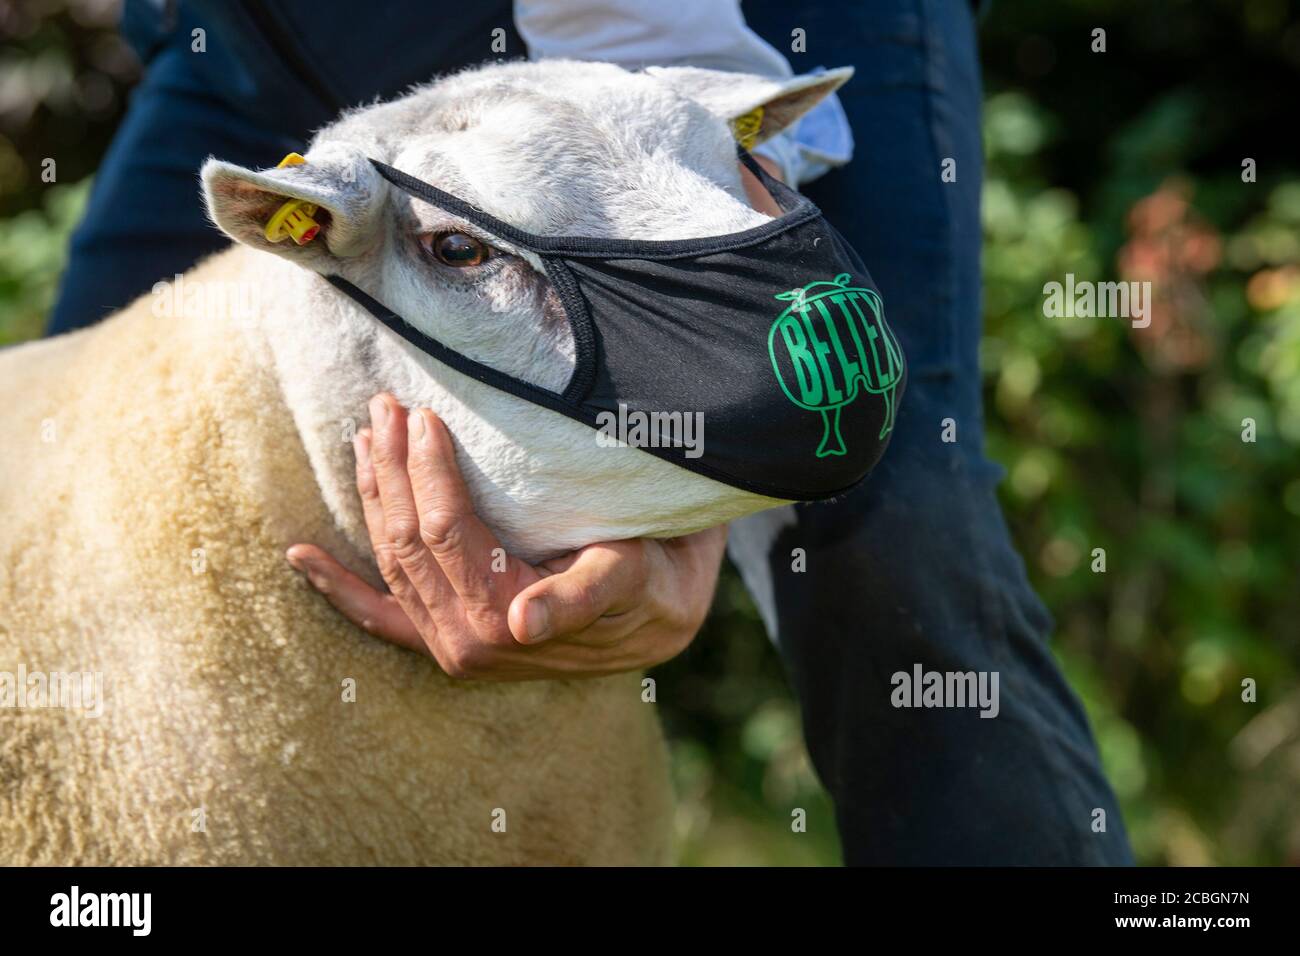 Carlisle Auction mart, Cumbria, UK. 13th Aug 2020. Sellers and purchasers of sheep were taking safety precations very seriously at a 3 day sale of Beltex Pedigree sheep at Carlisle Auction mart, with this special ram wearing his very own personalised mask, whilst maintain social distance from the other sheep! Credit: Wayne HUTCHINSON/Alamy Live News Stock Photo